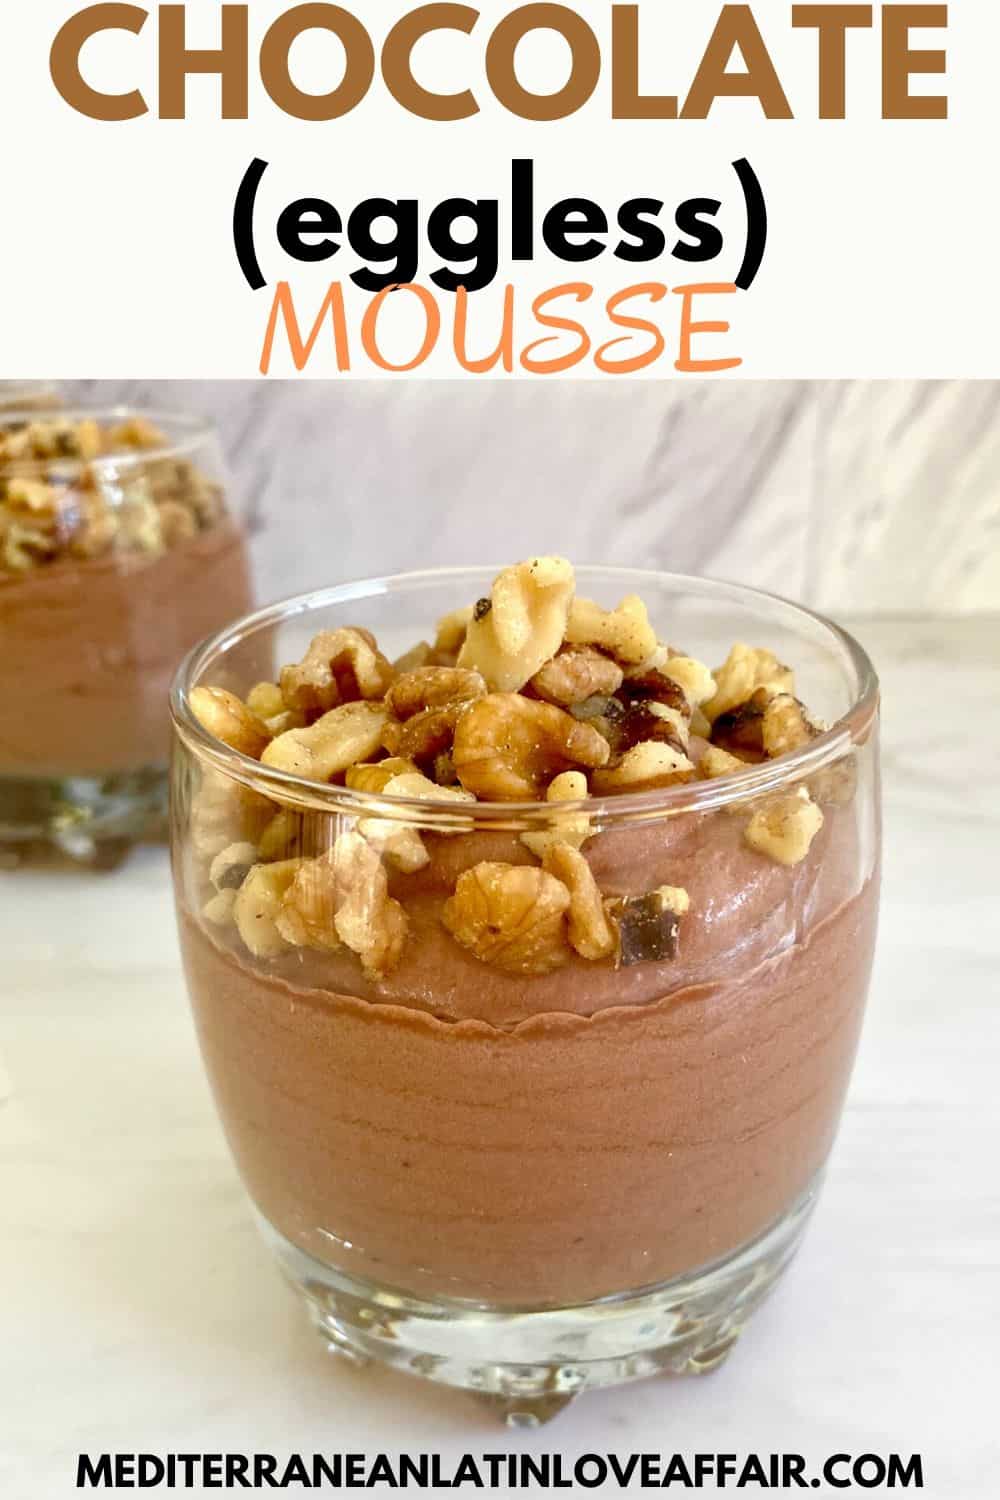 Homemade chocolate mousse topped with chopped walnuts served in a cup on the foreground, you can see other cups in the background.